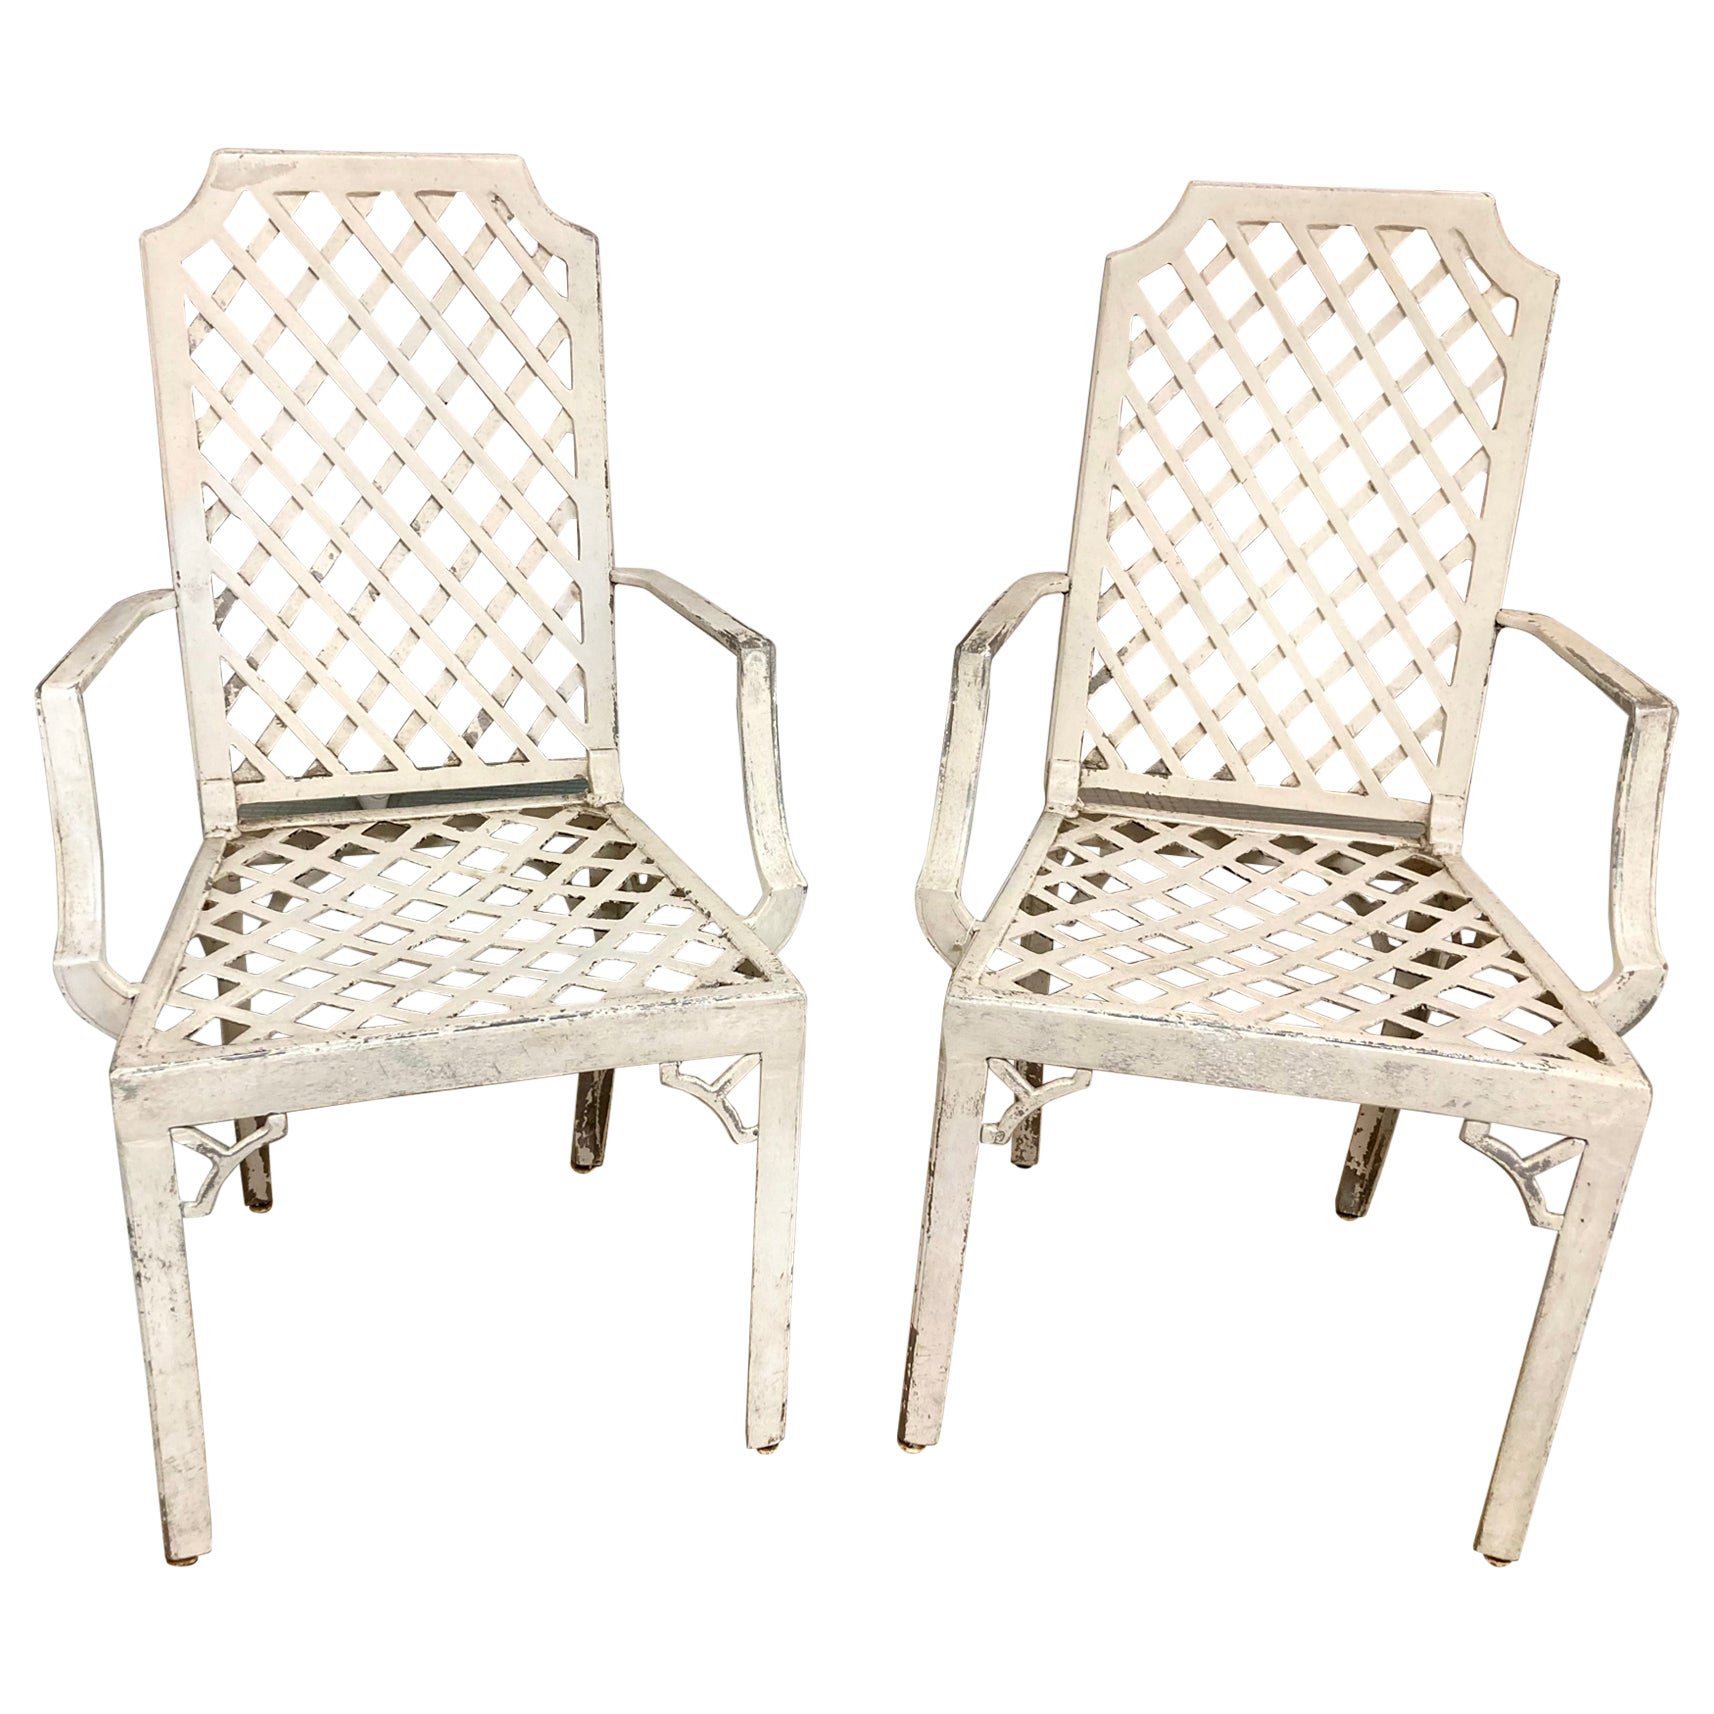 Hollywood Regency Lattice Pattern Patio Arm Chairs in Original Finish, a Pair